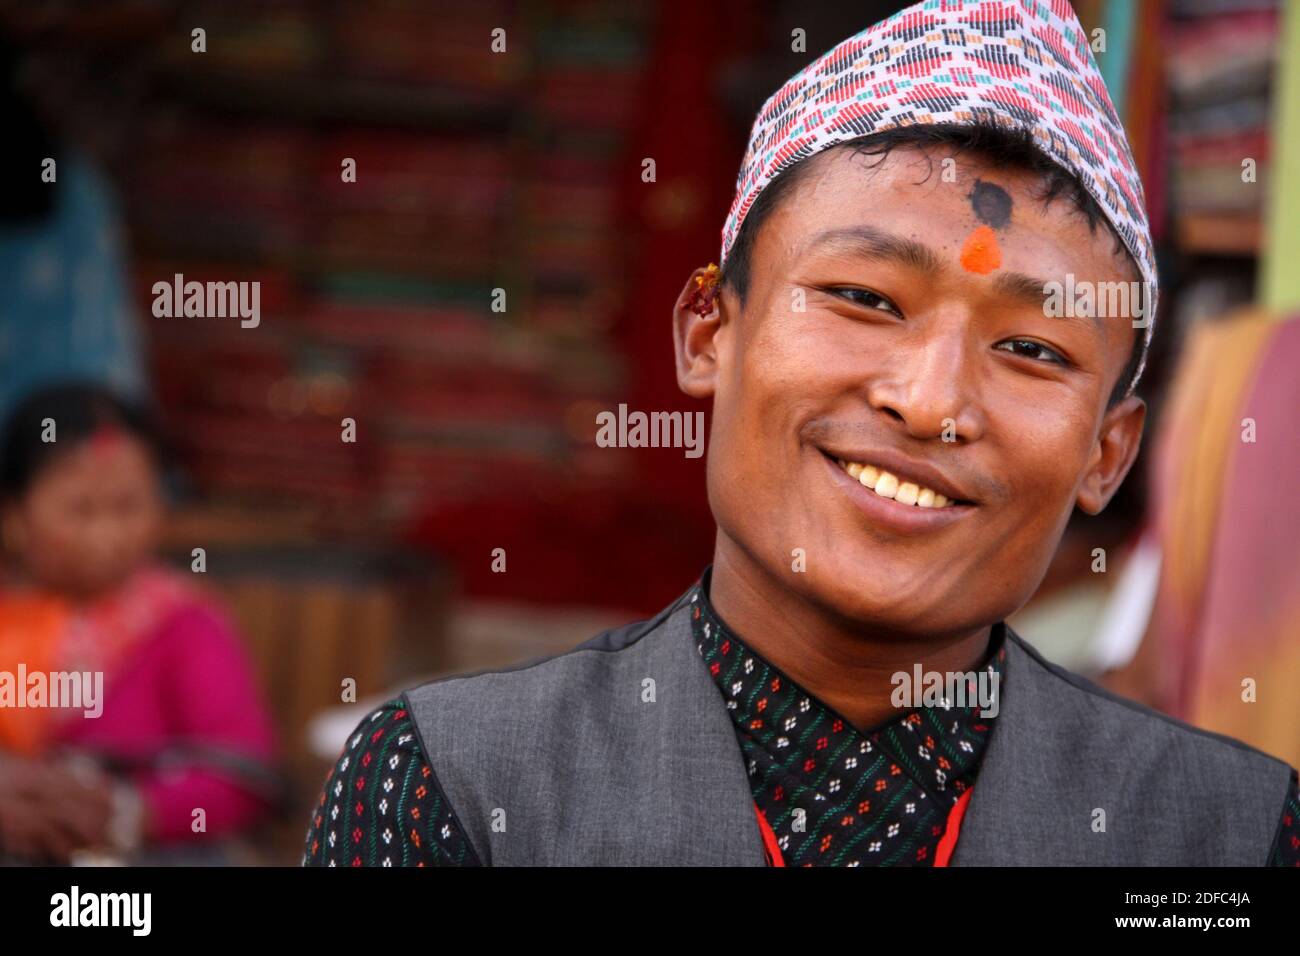 Nepal, in Patan, young Nepalese man smiling with tilak and traditional hat called Dhaka topi Stock Photo